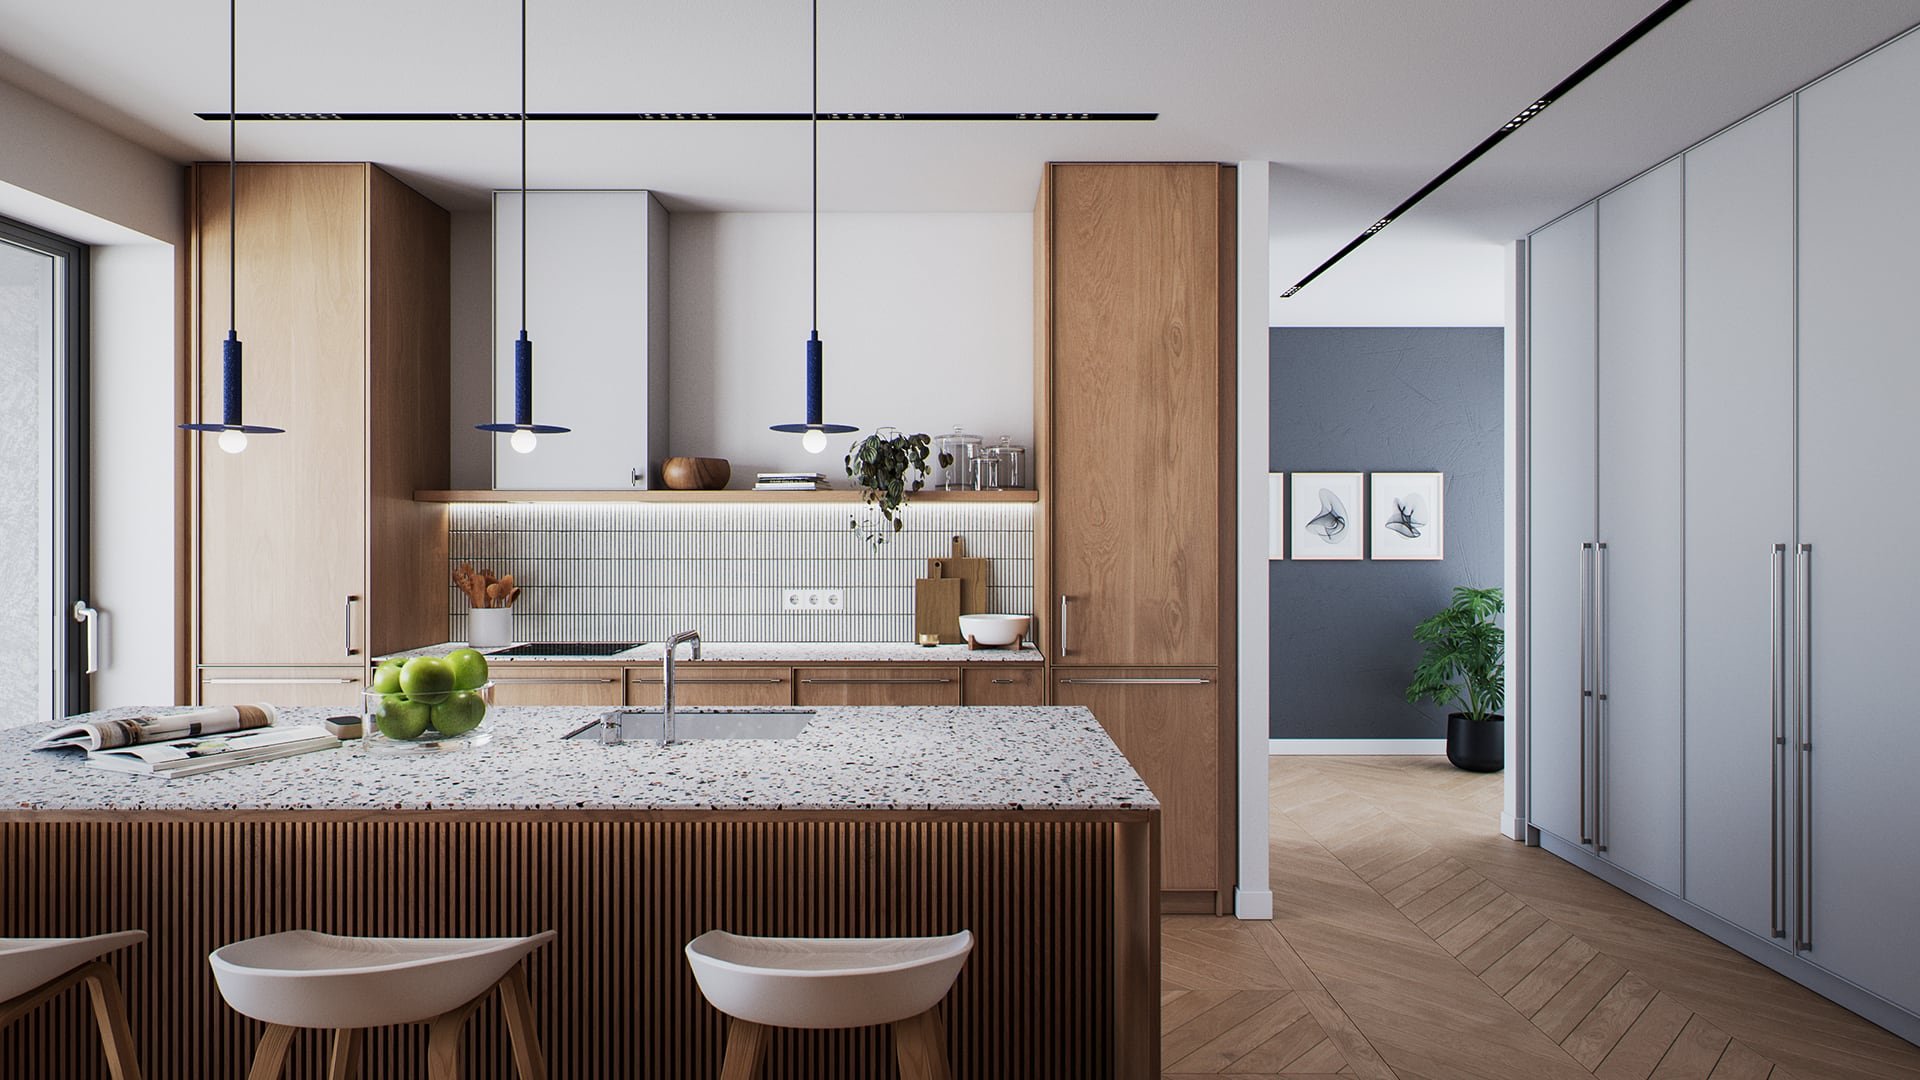 Breaking-Clouds_LTH Kitchen_Photorealistic-Rendering_A.jpg